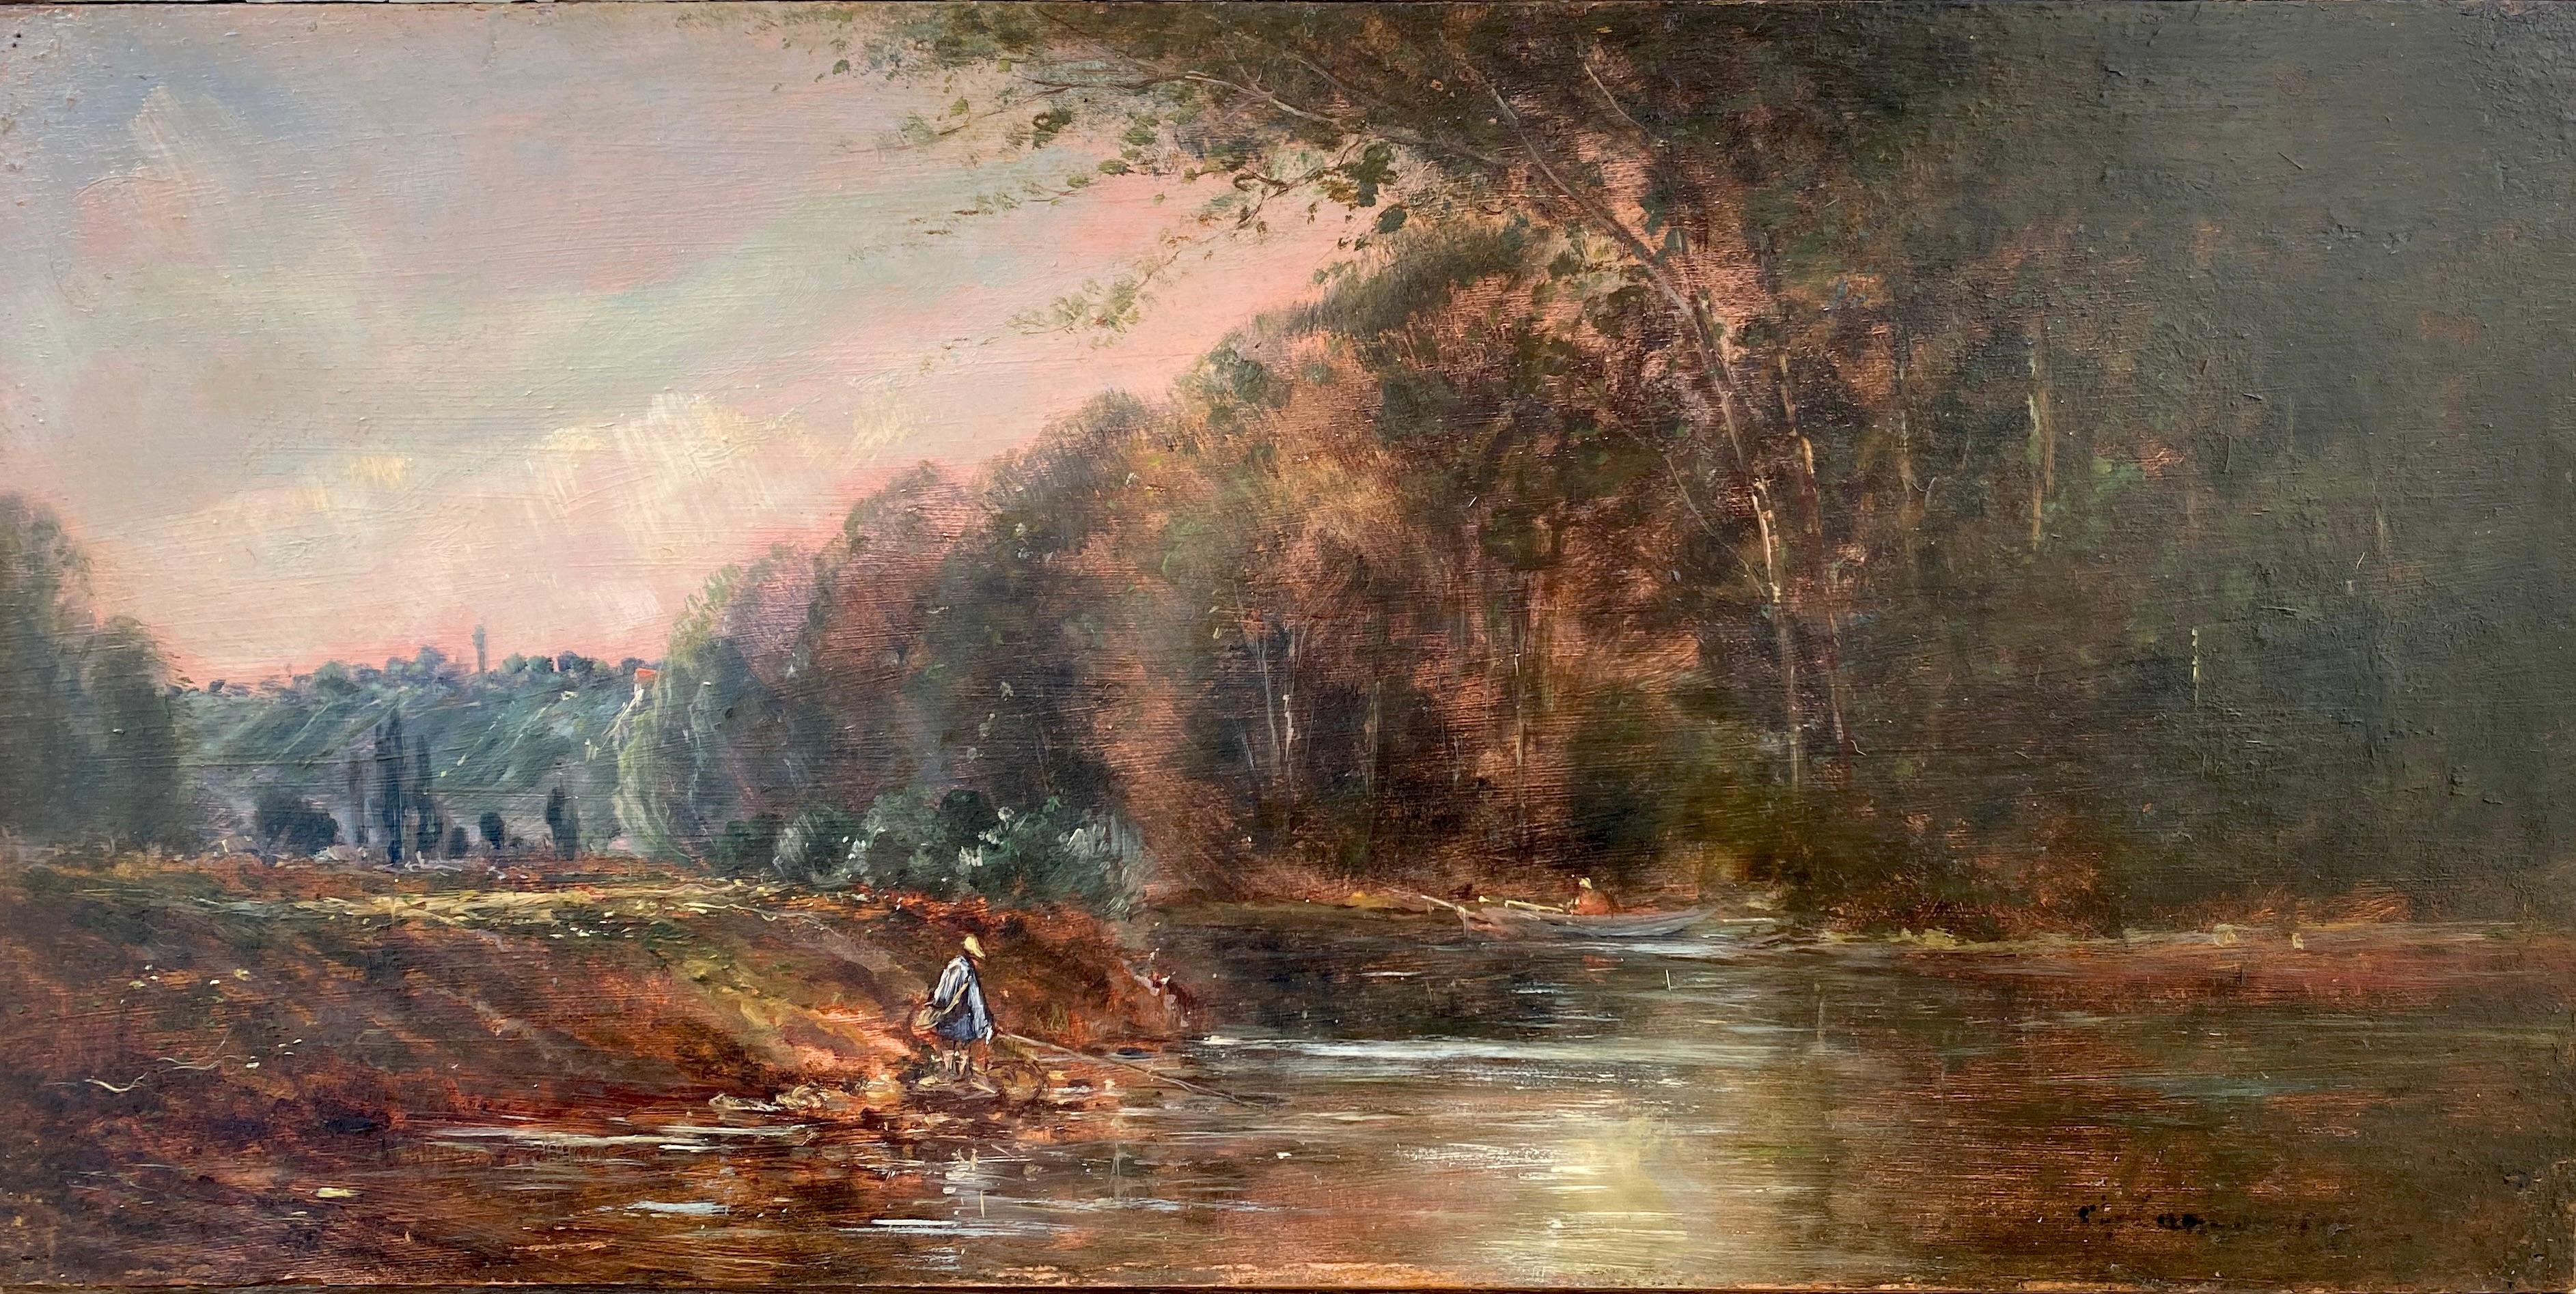 Light on the water, luminous river landscape with two lone figures painting - Painting by Charles Lapostolet